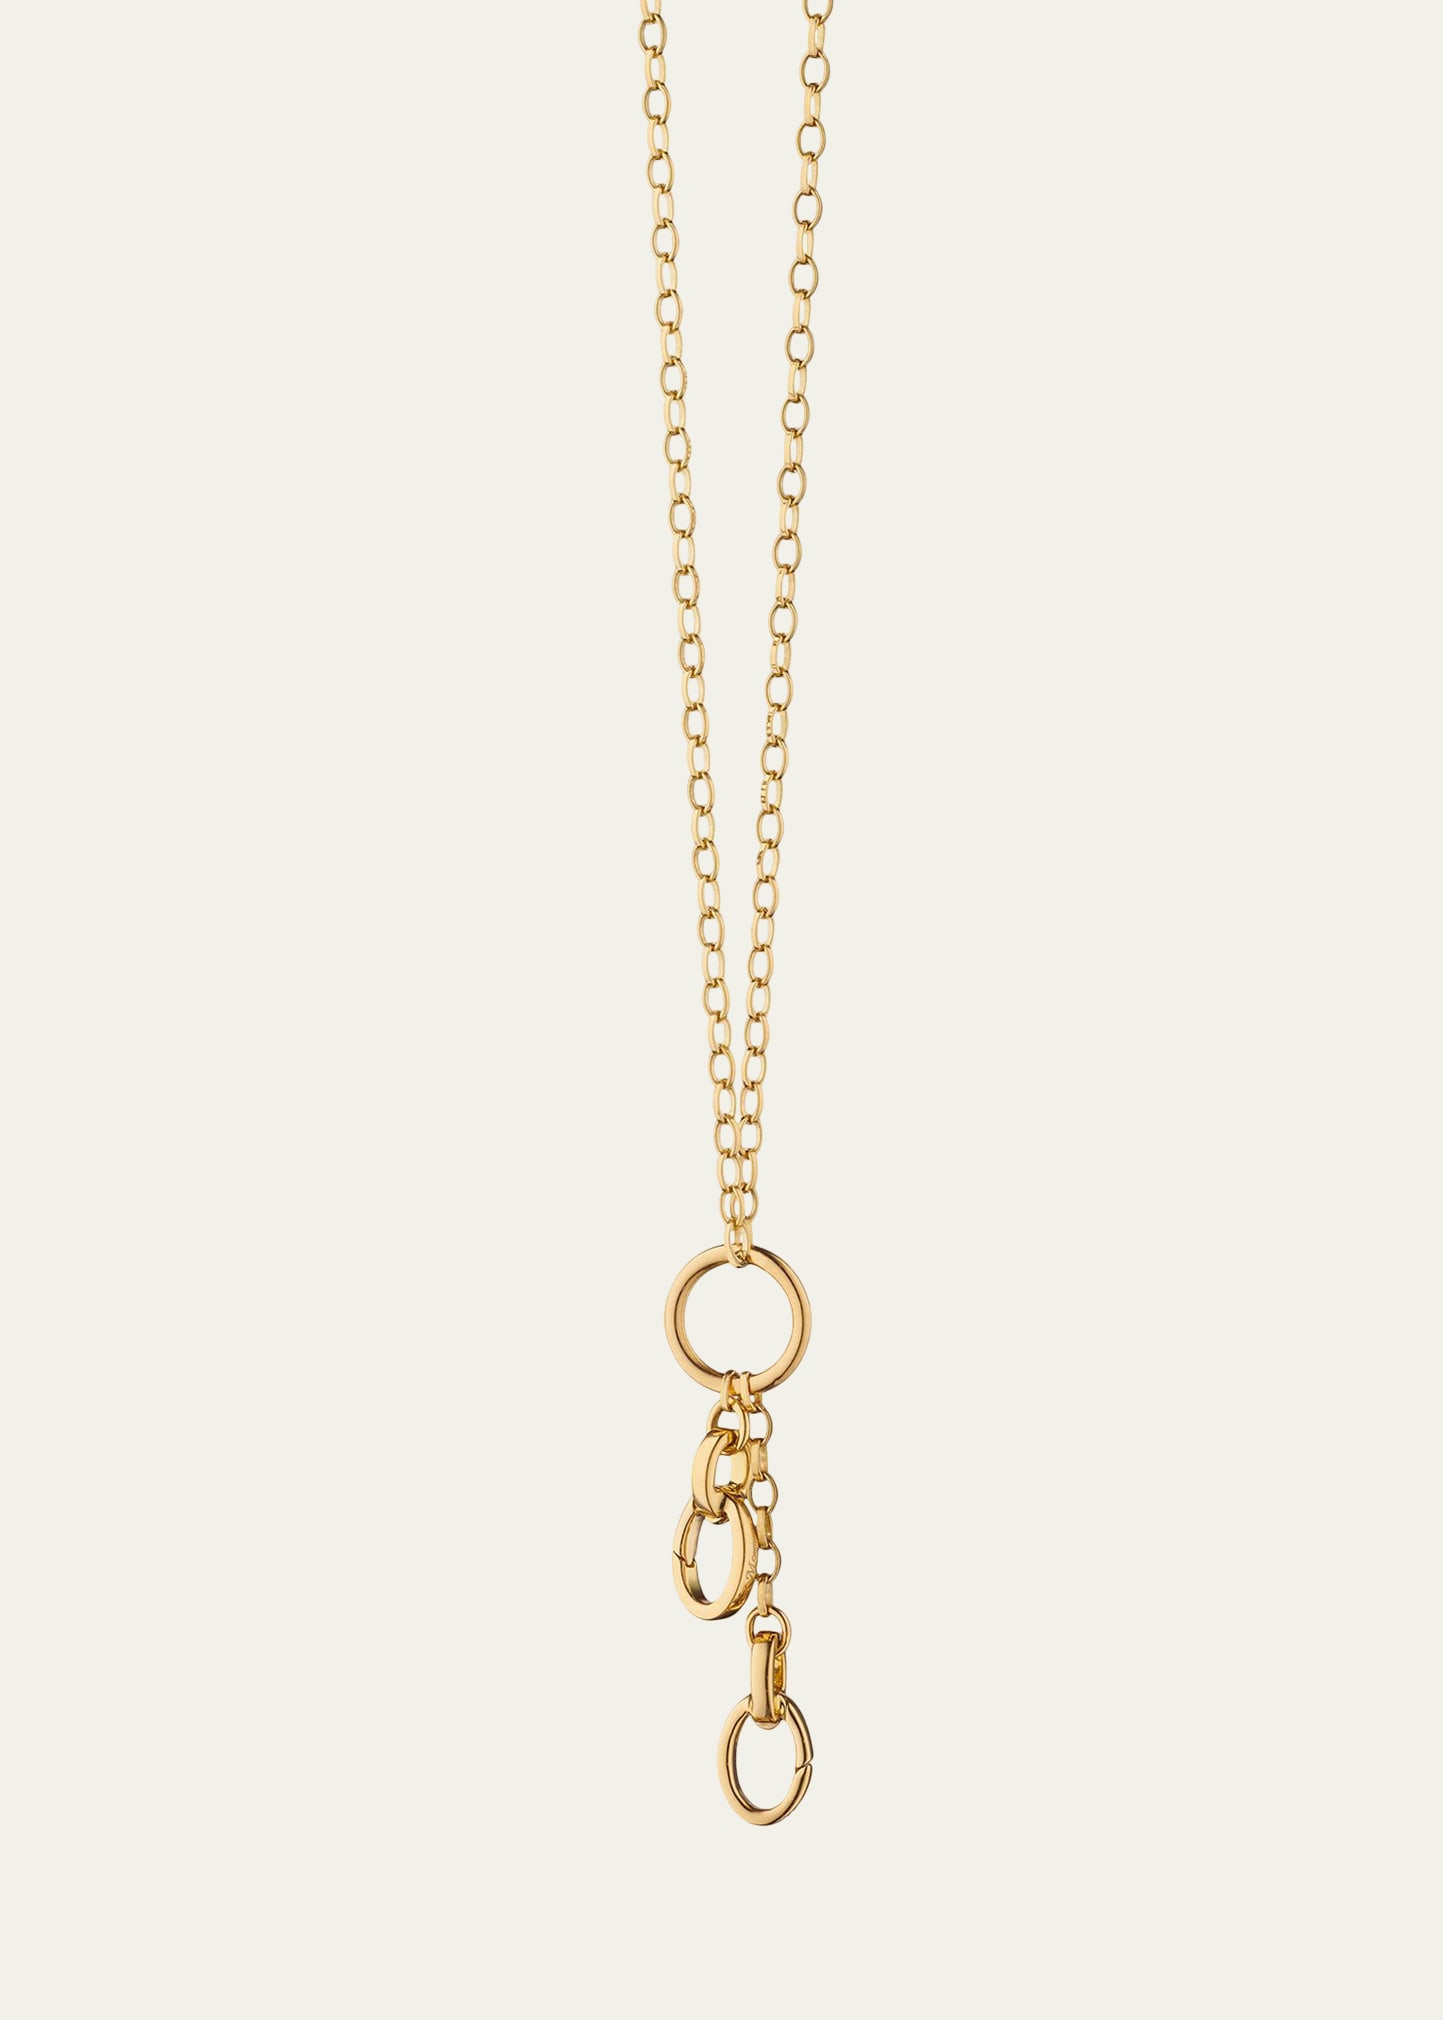 18K Gold Belcher Chain Necklace with 3 Enhancers